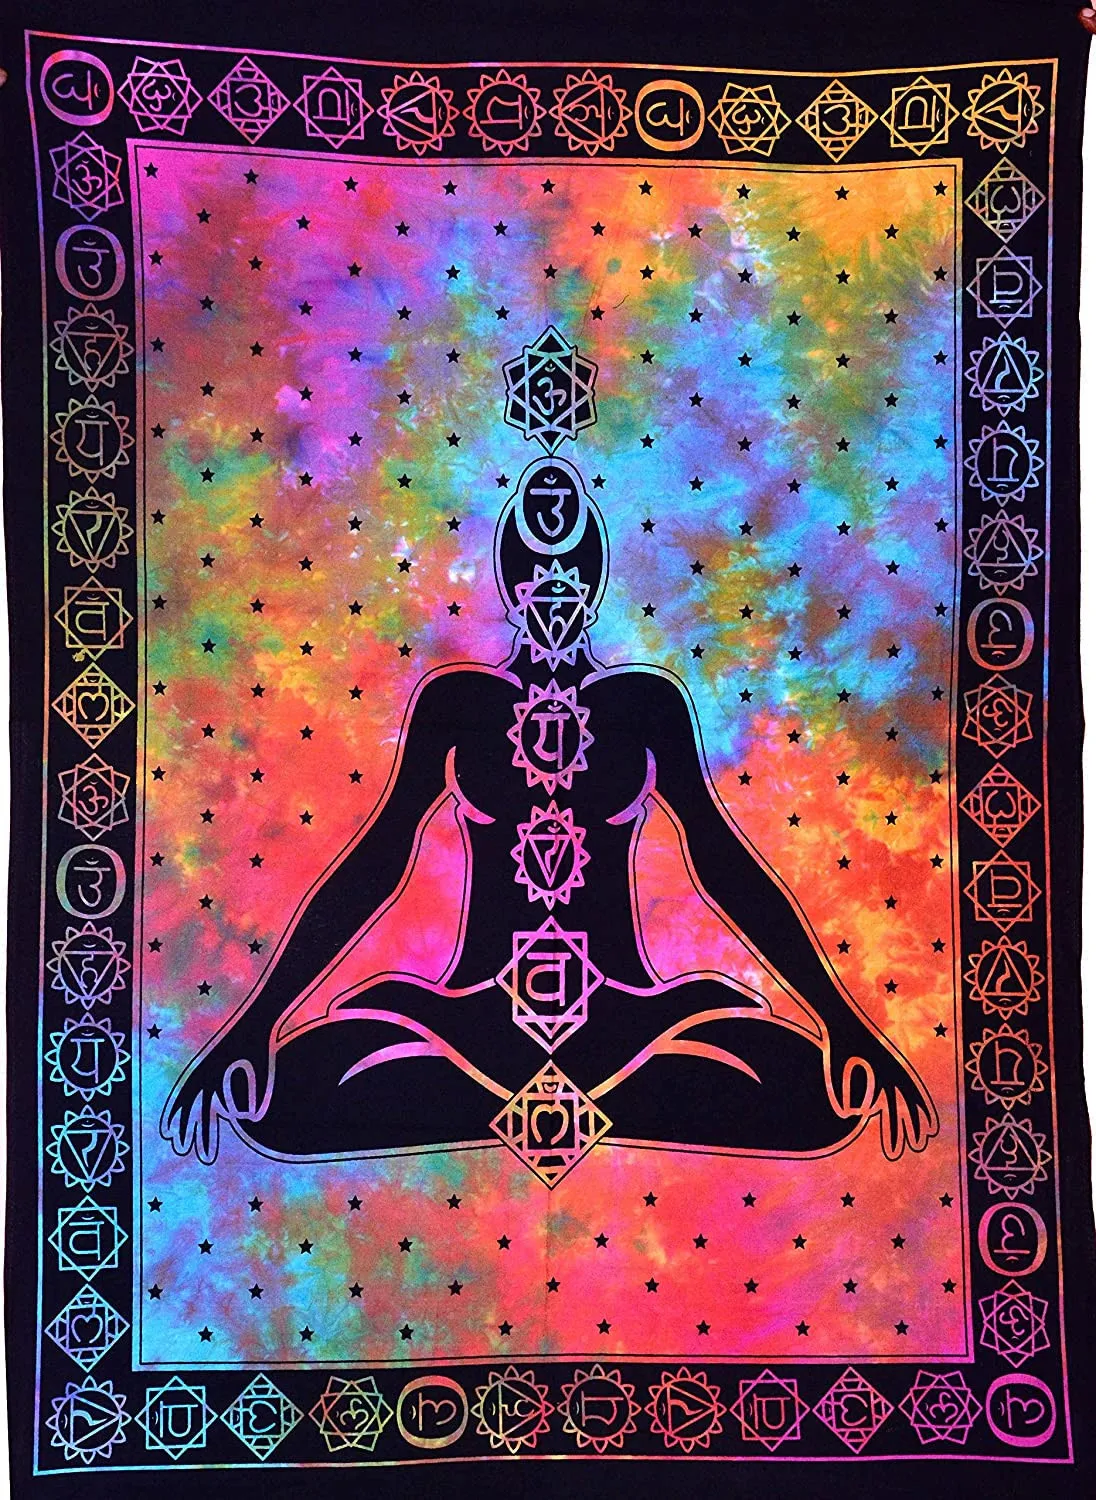 

2022 Hawkalice Psychedelic Tapestry Yoga Meditation Tapestries Trippy Tapestry Hippie Bohemian Tapestry Wall Hanging 39x29 inc